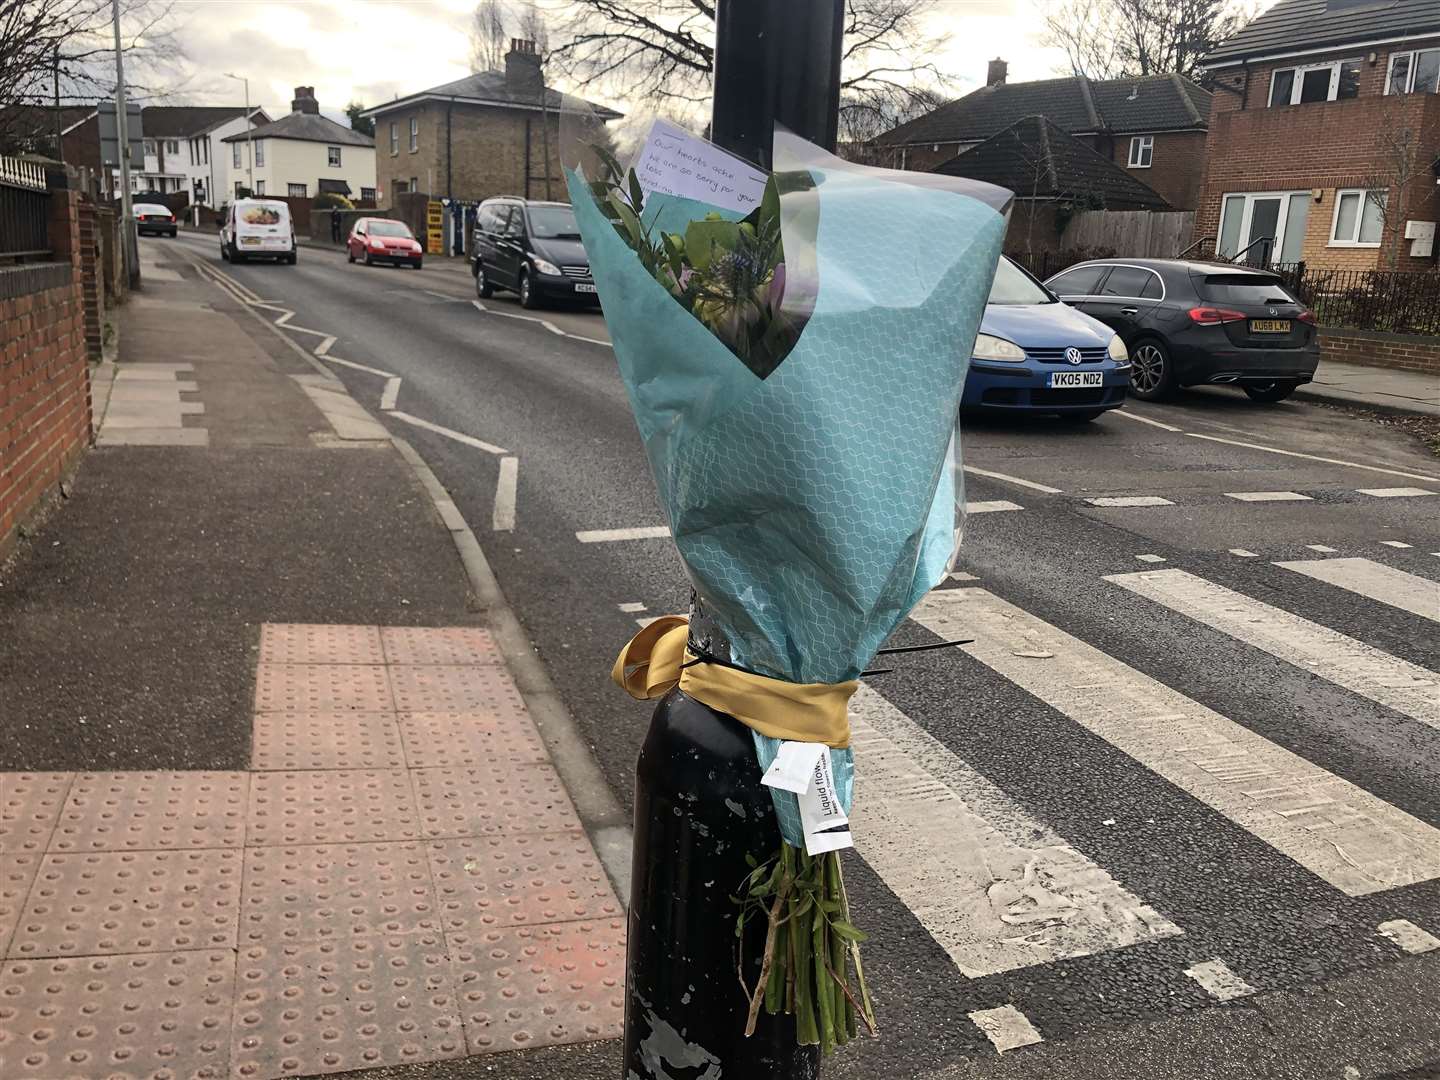 Floral, candle and basketball tributes have been laid in Vale Road